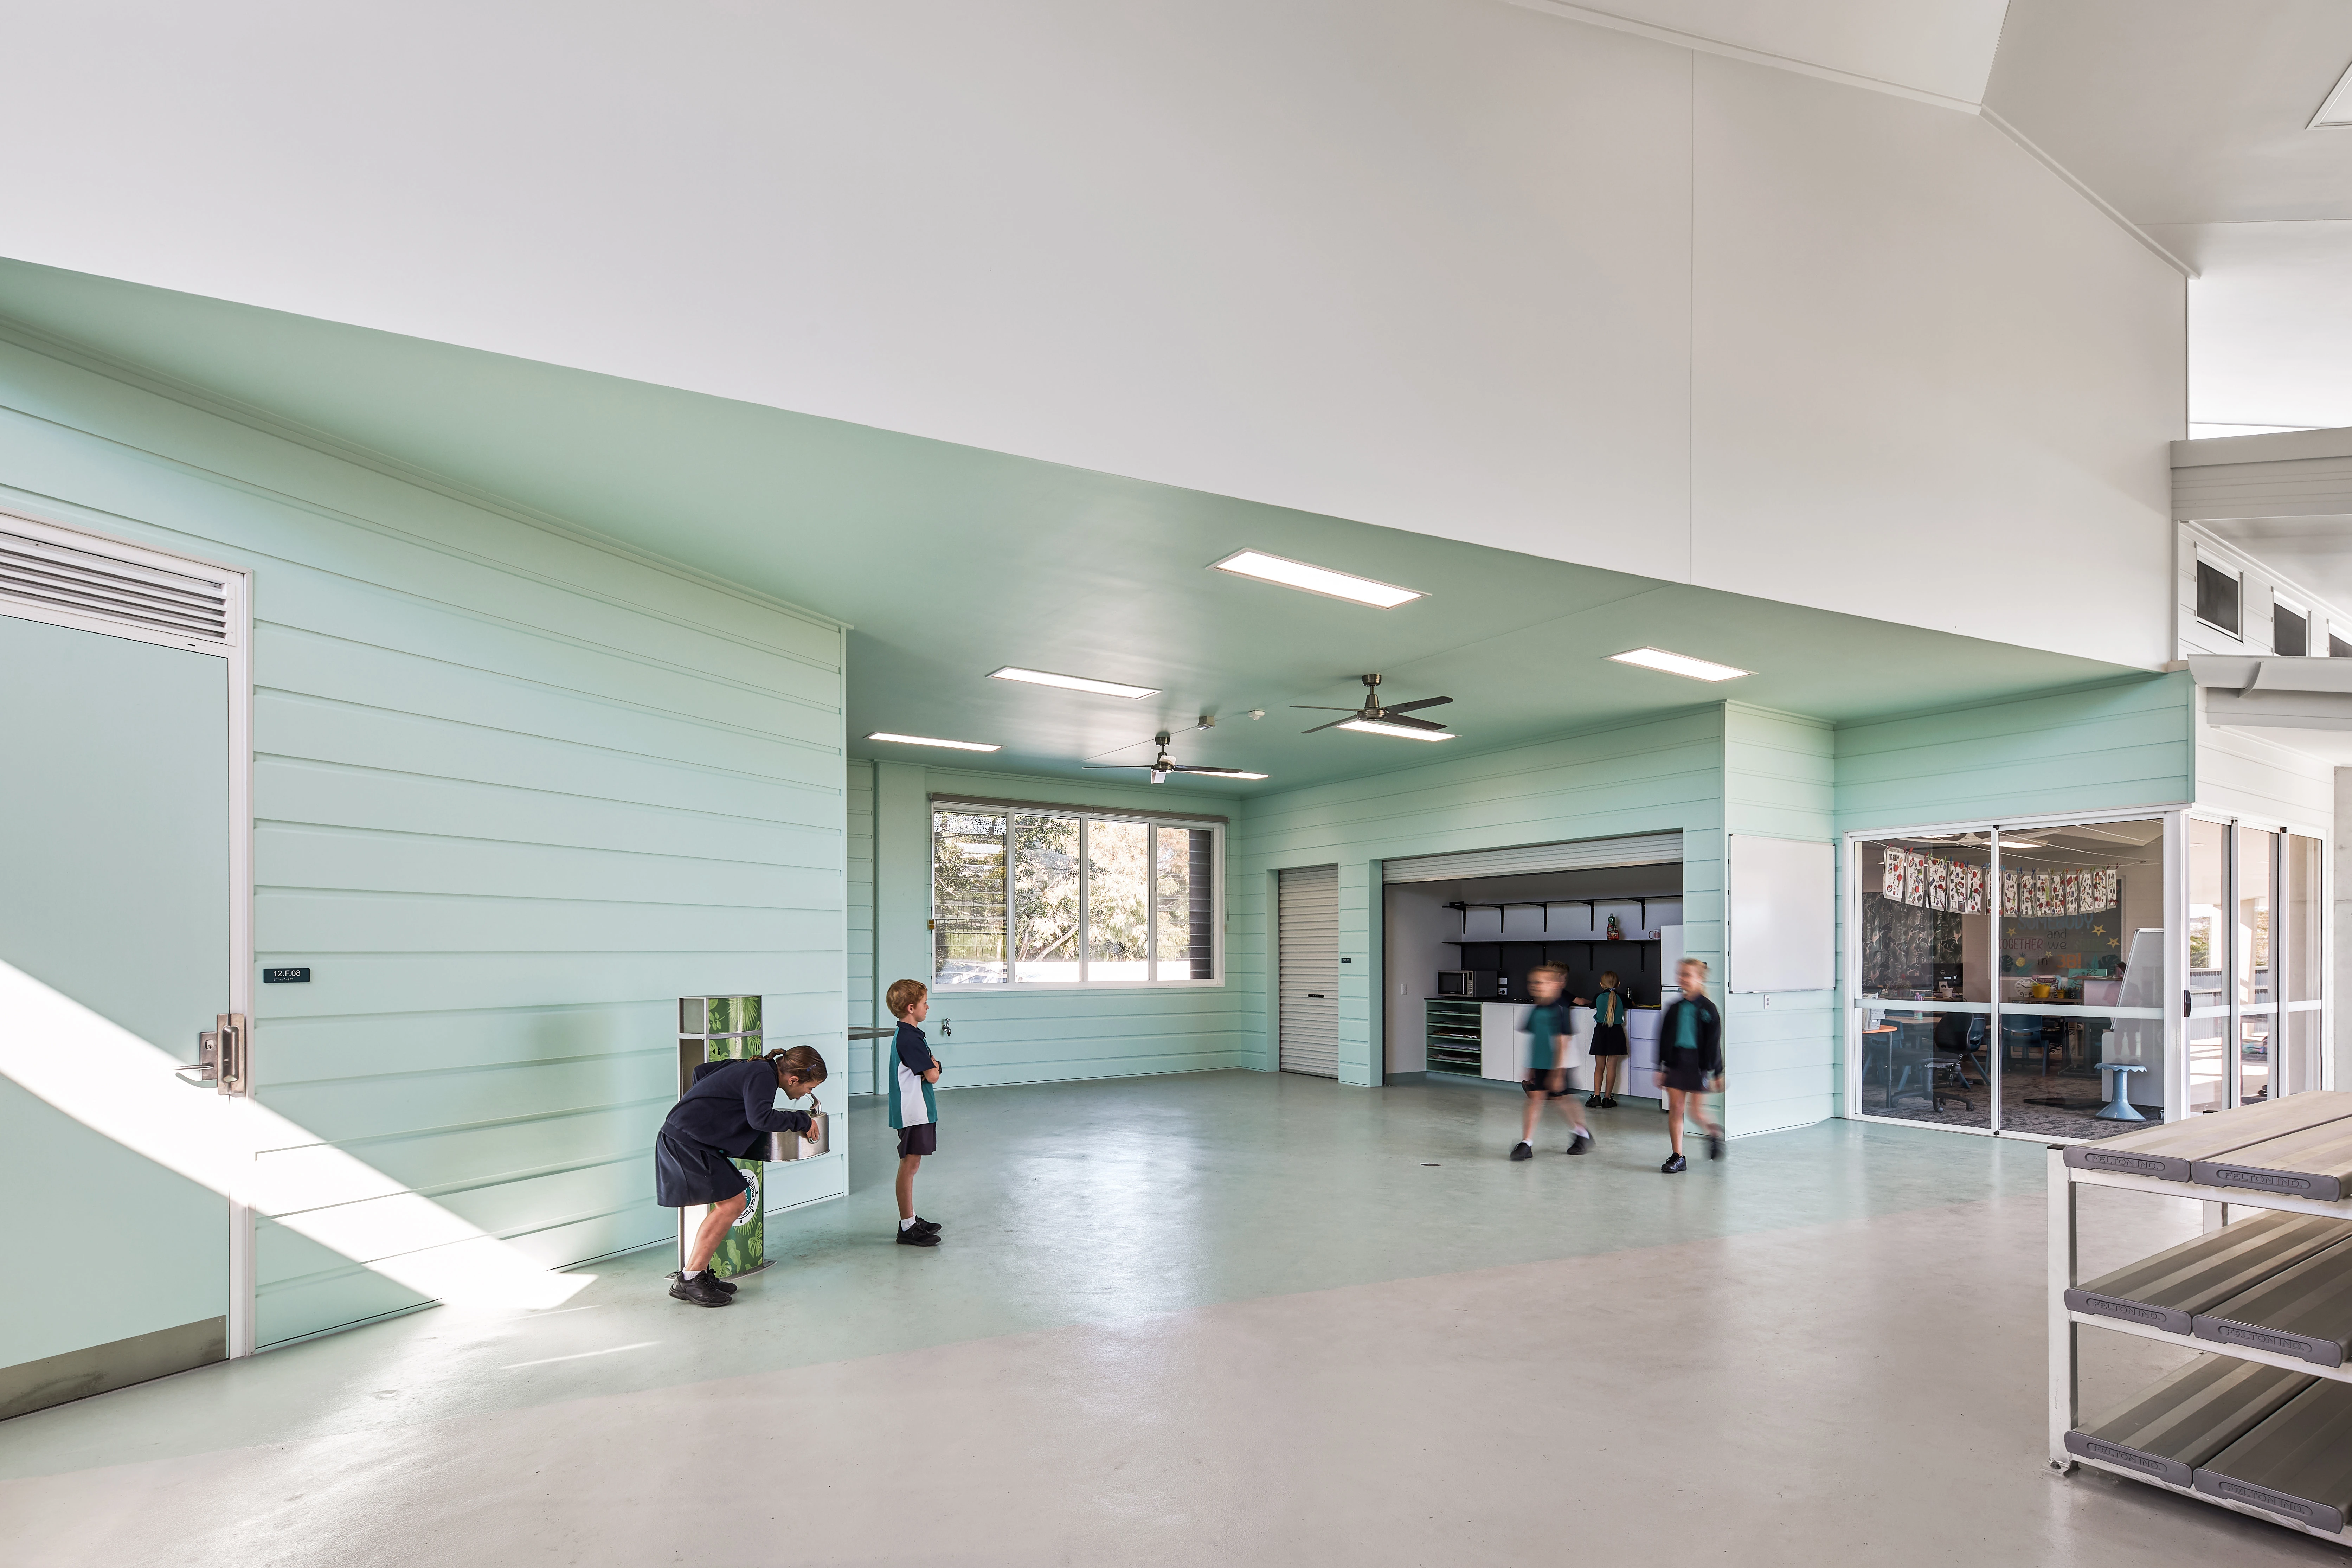 School with light green and white walls